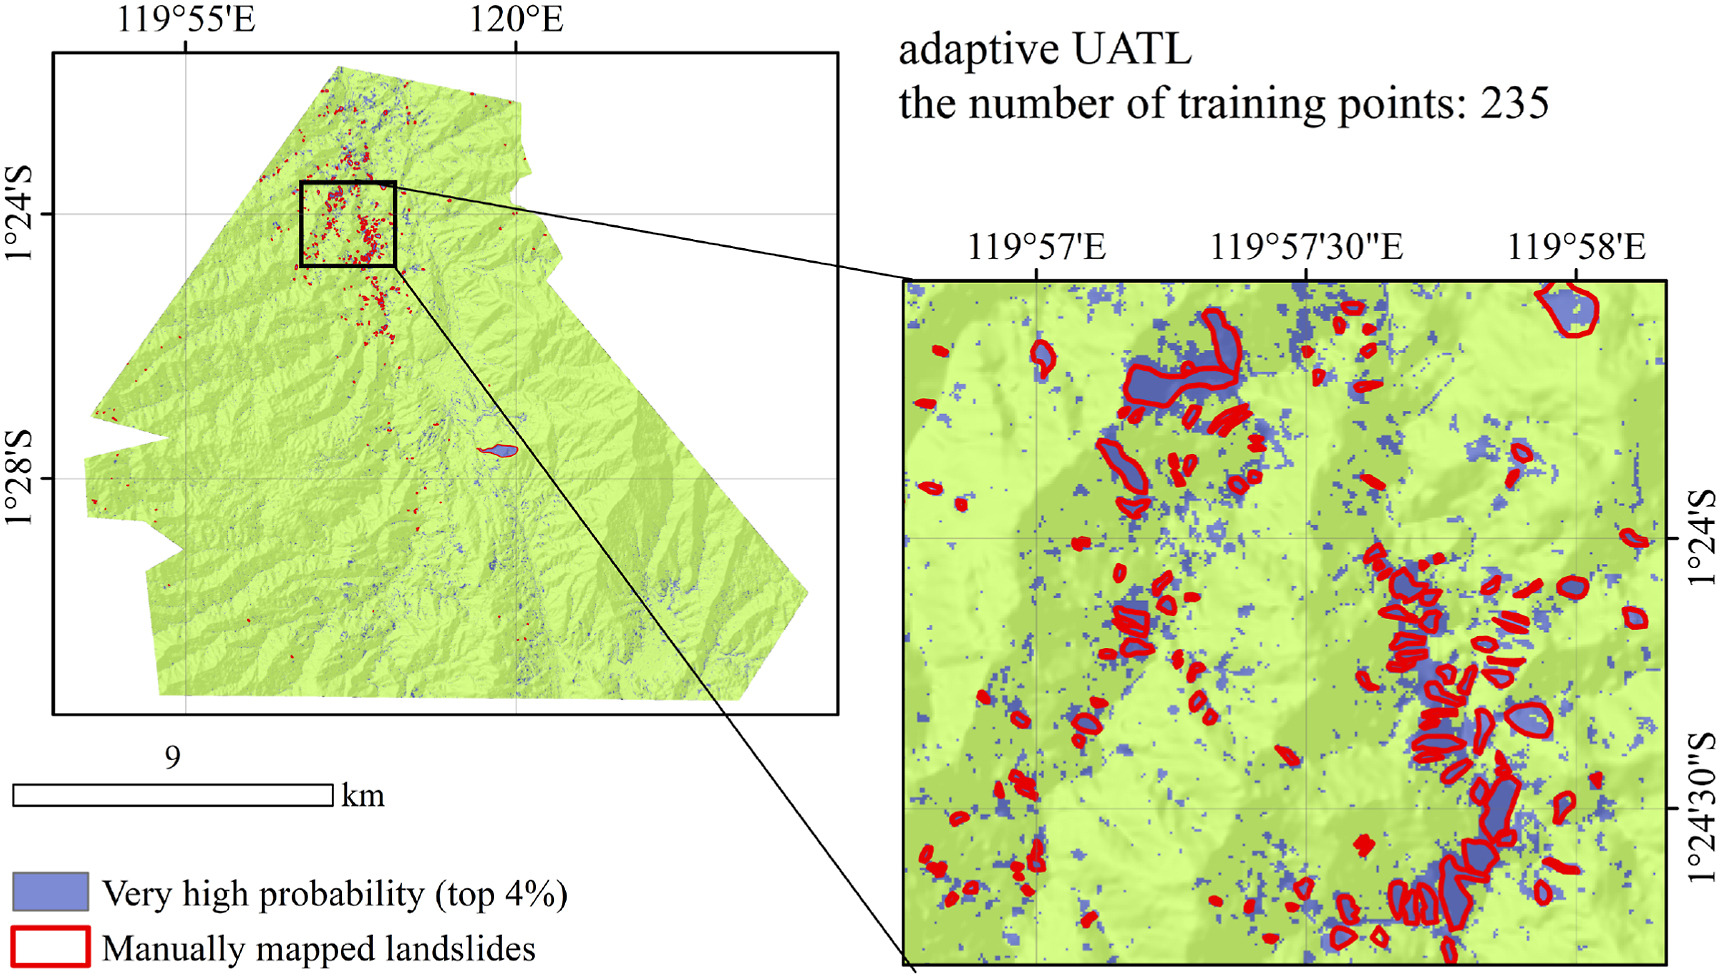 Landslide map showing only predictions in the “very high” category as mapped landslides. The map is based on adaptive UATL with 235 training points.